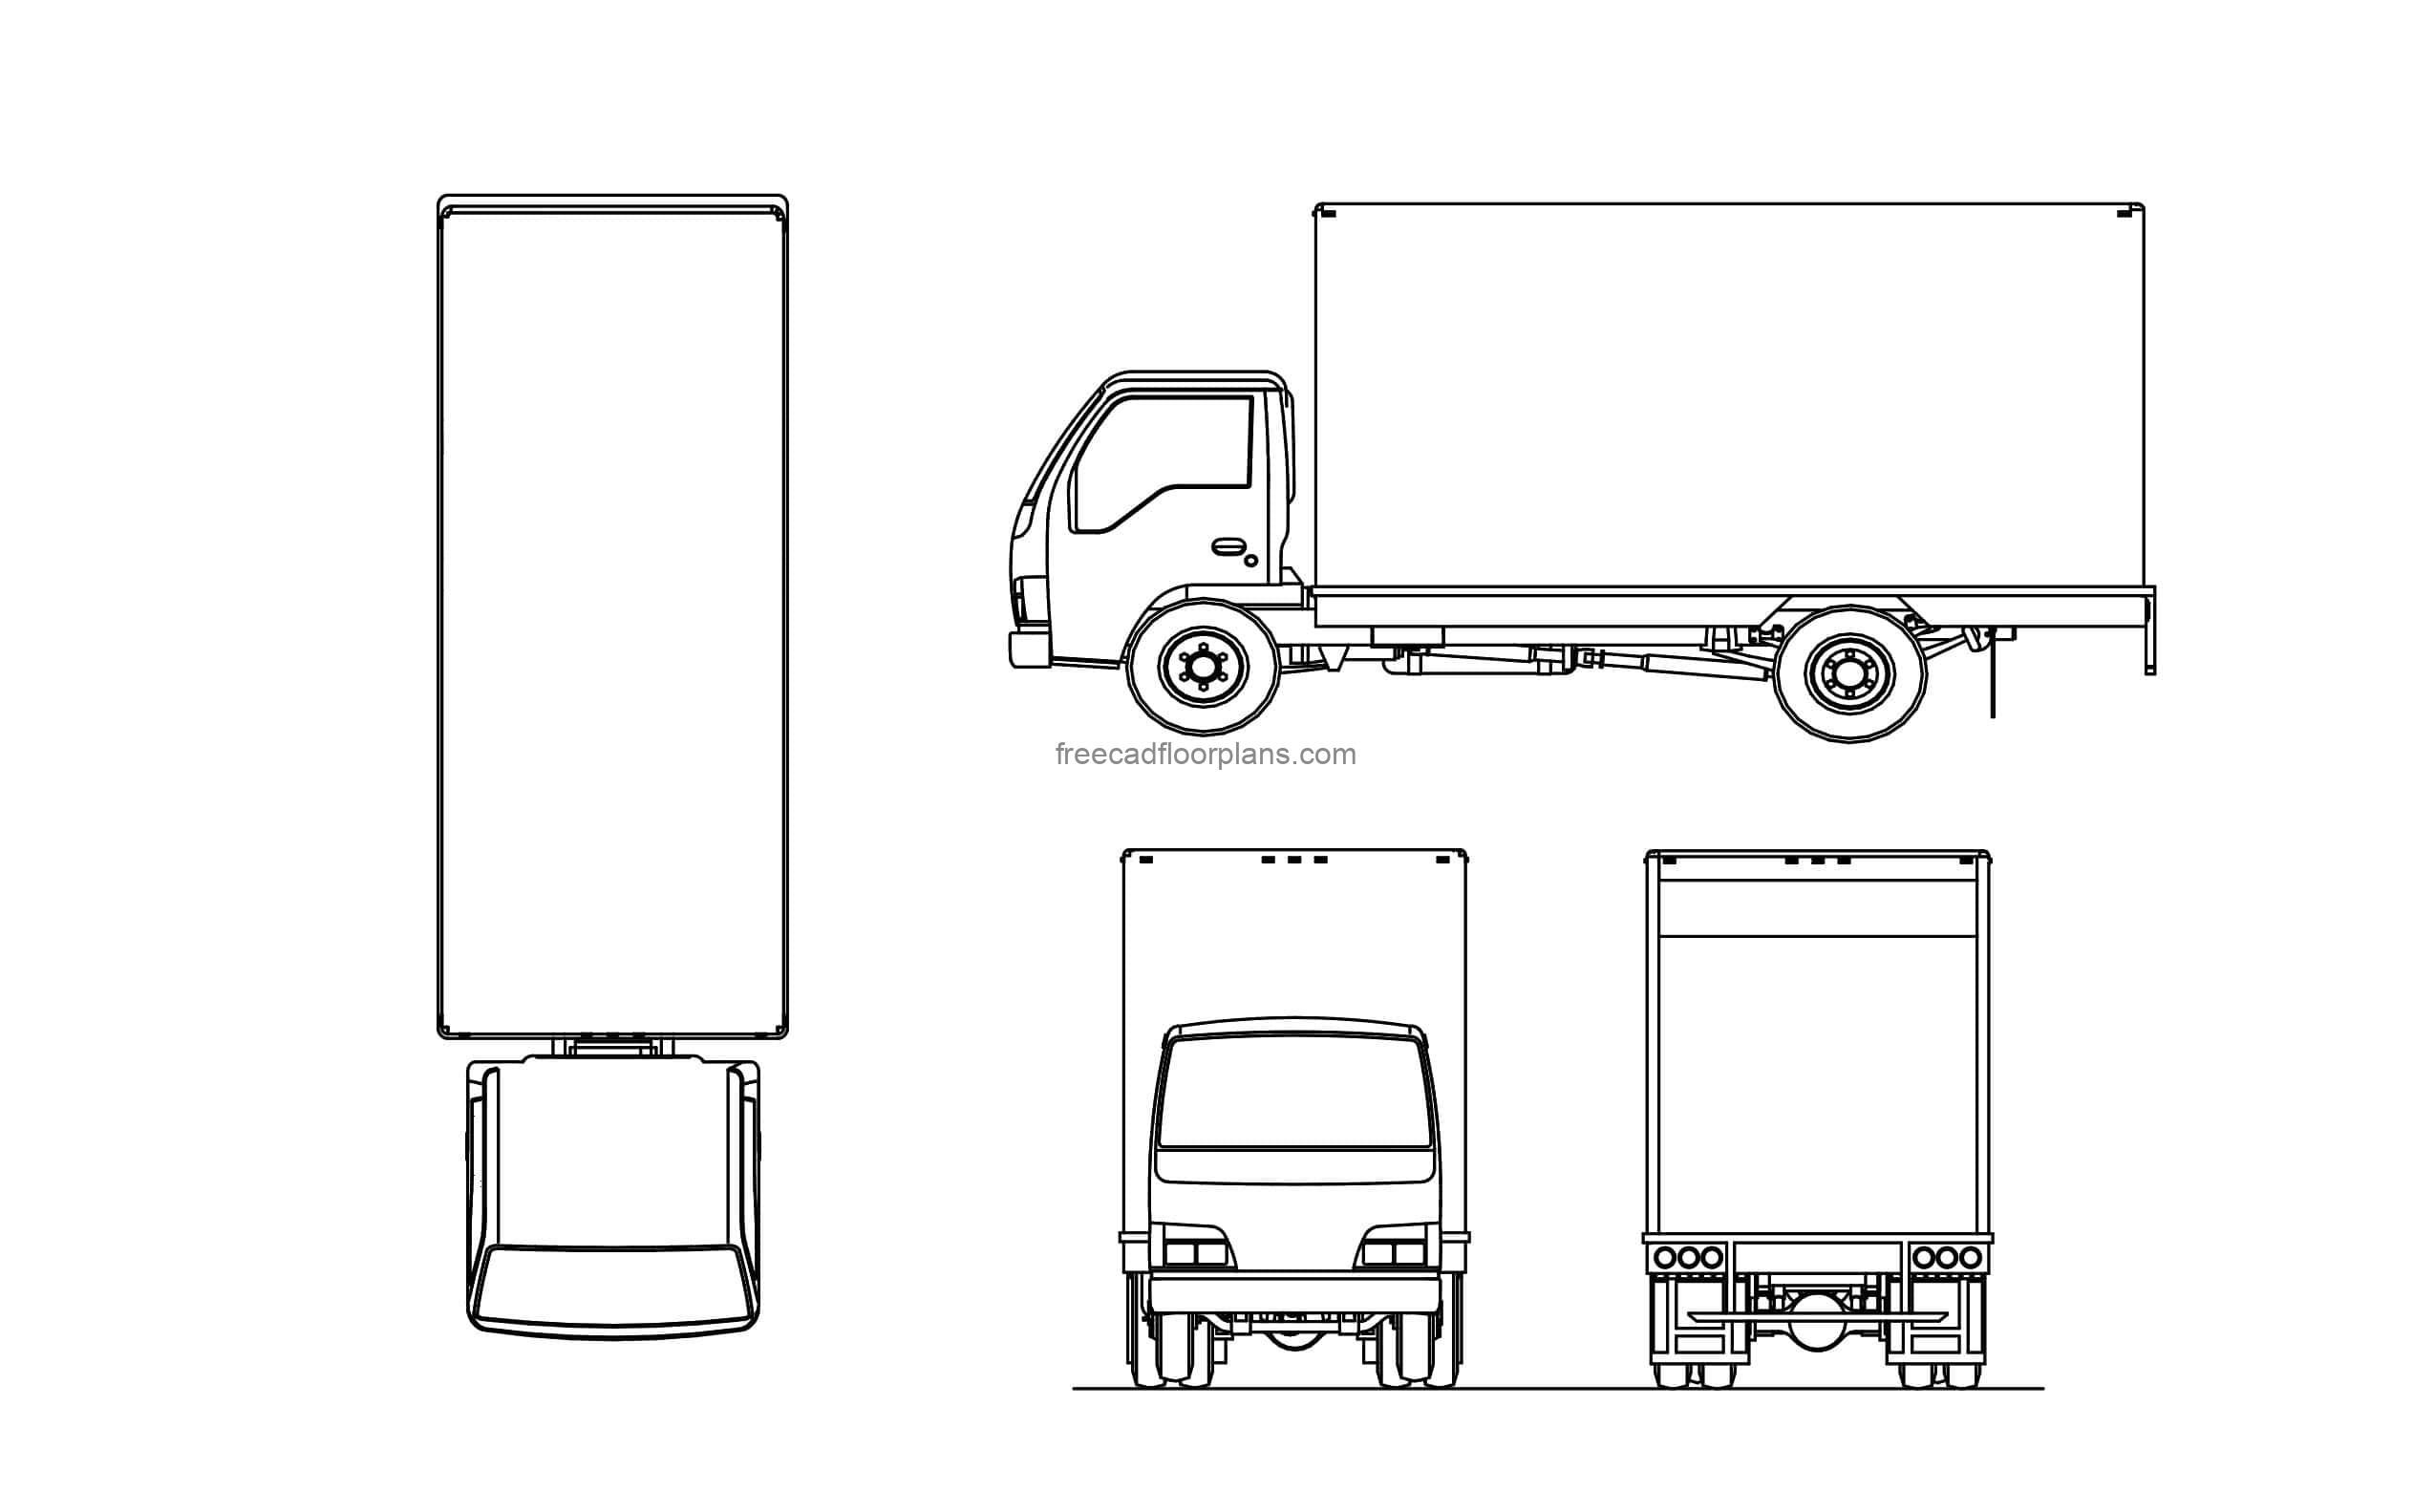 autocad drawing of an isuzu box truck cad block with plan , front and sides elevations 2d views dwg format file for free download